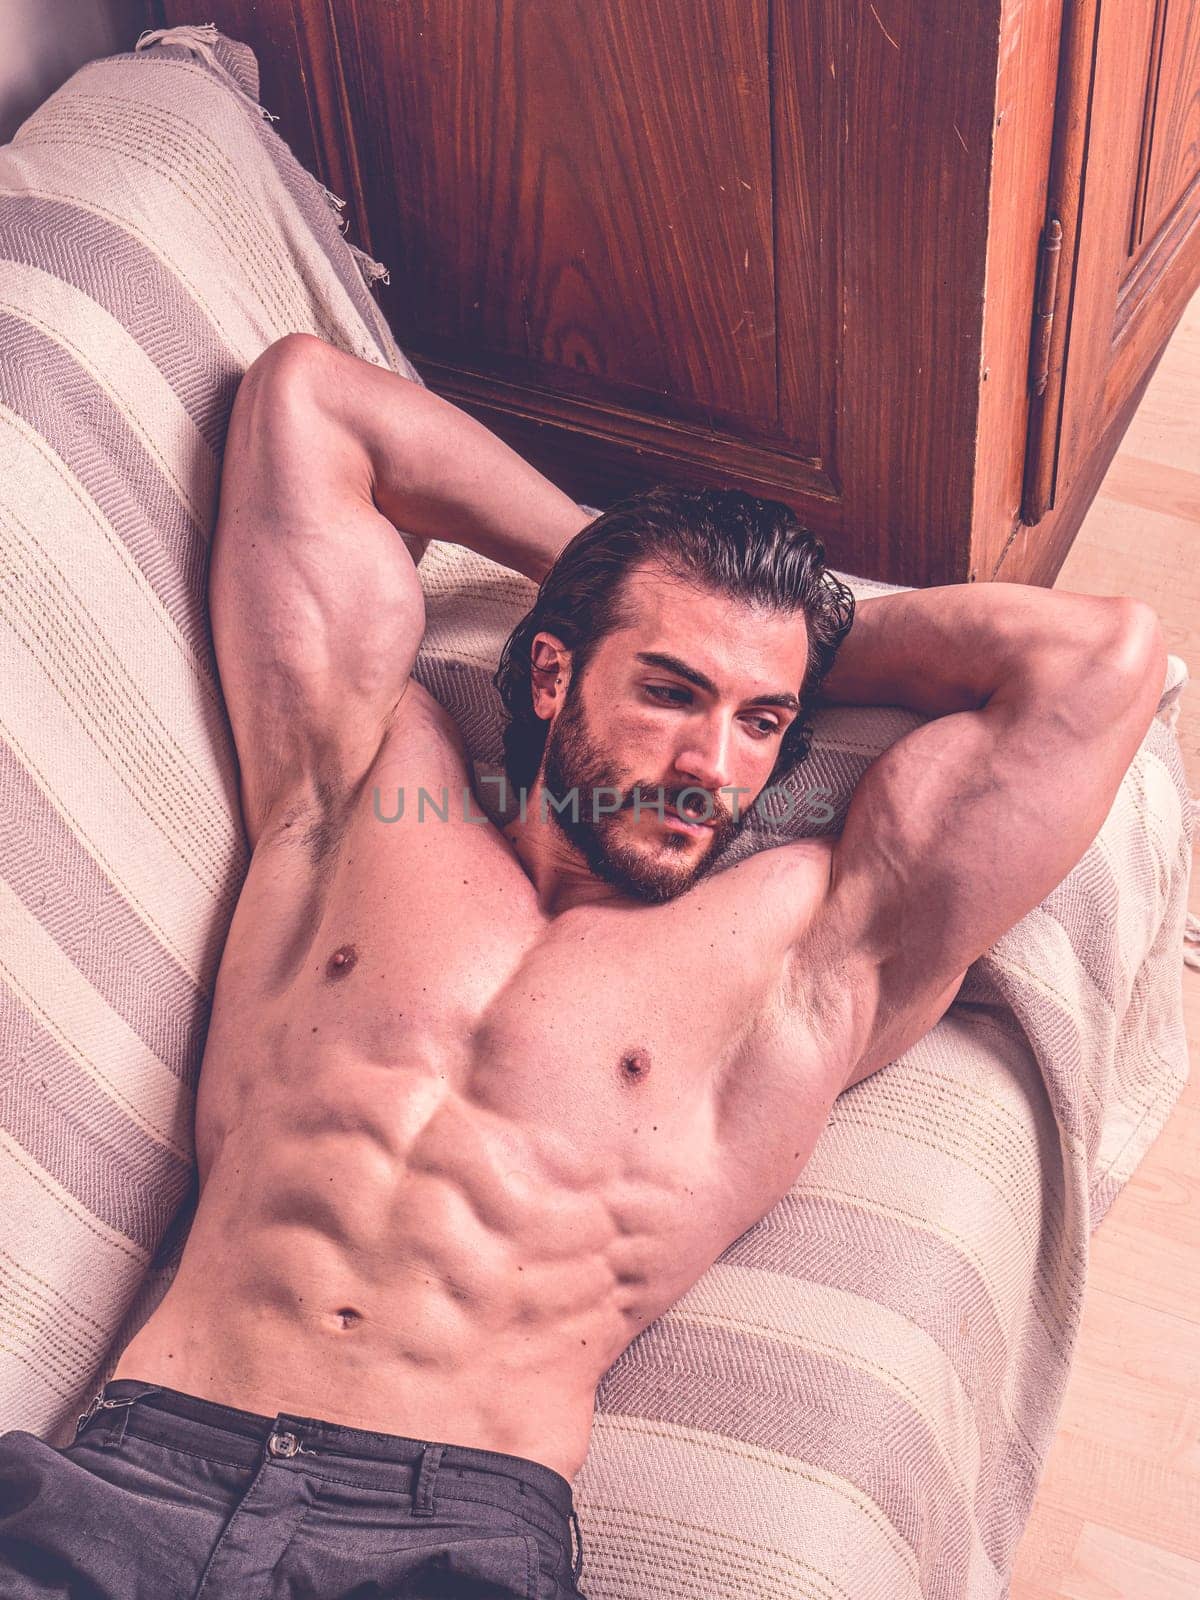 Handsome shirtless muscular young man at home laying on couch, an expression of tranquility, in a health and fitness concept